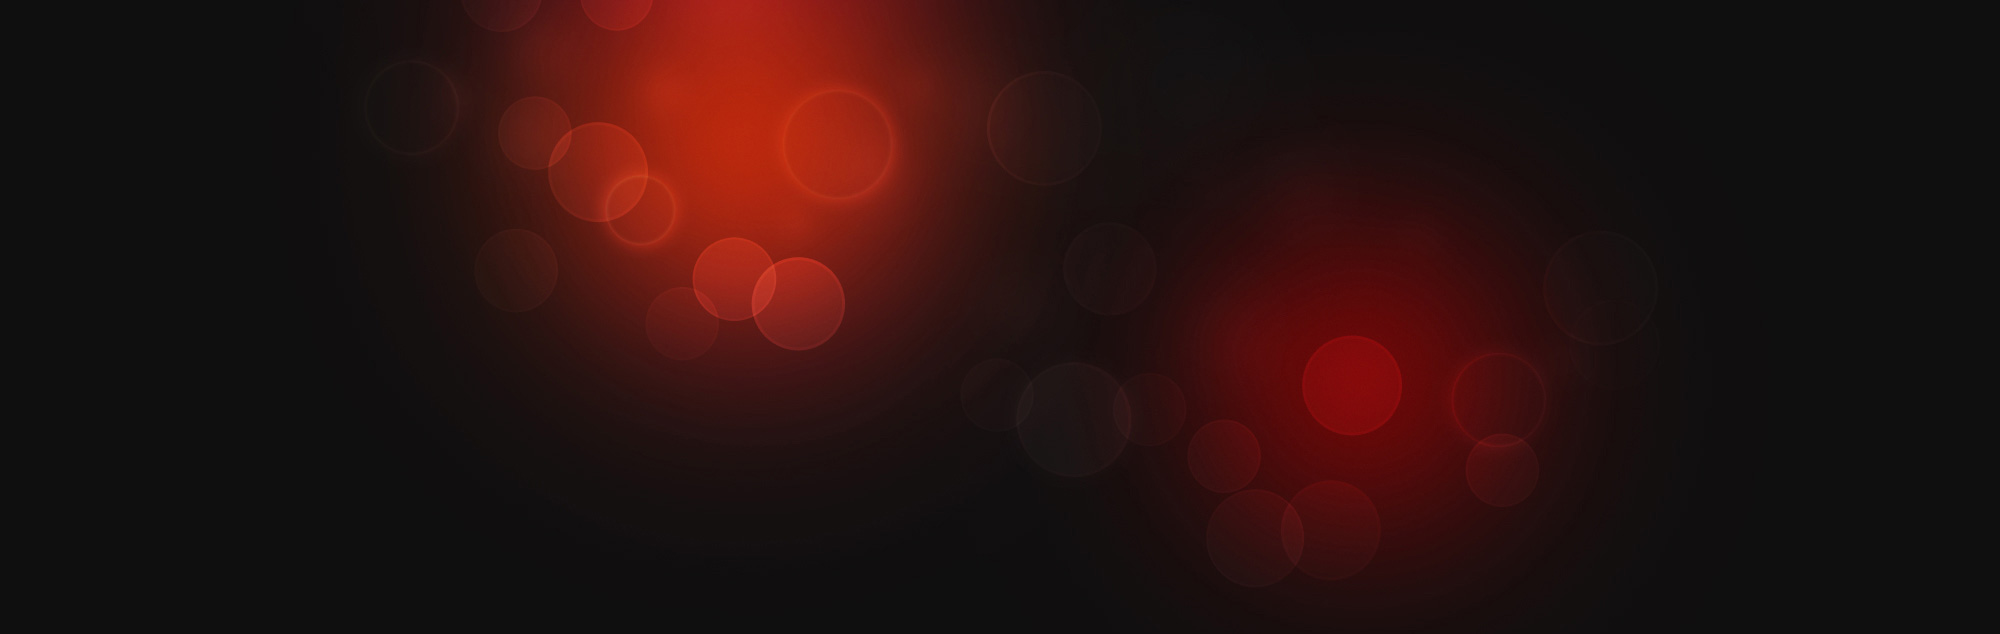 black and red graphic background for Sign Vision Co.